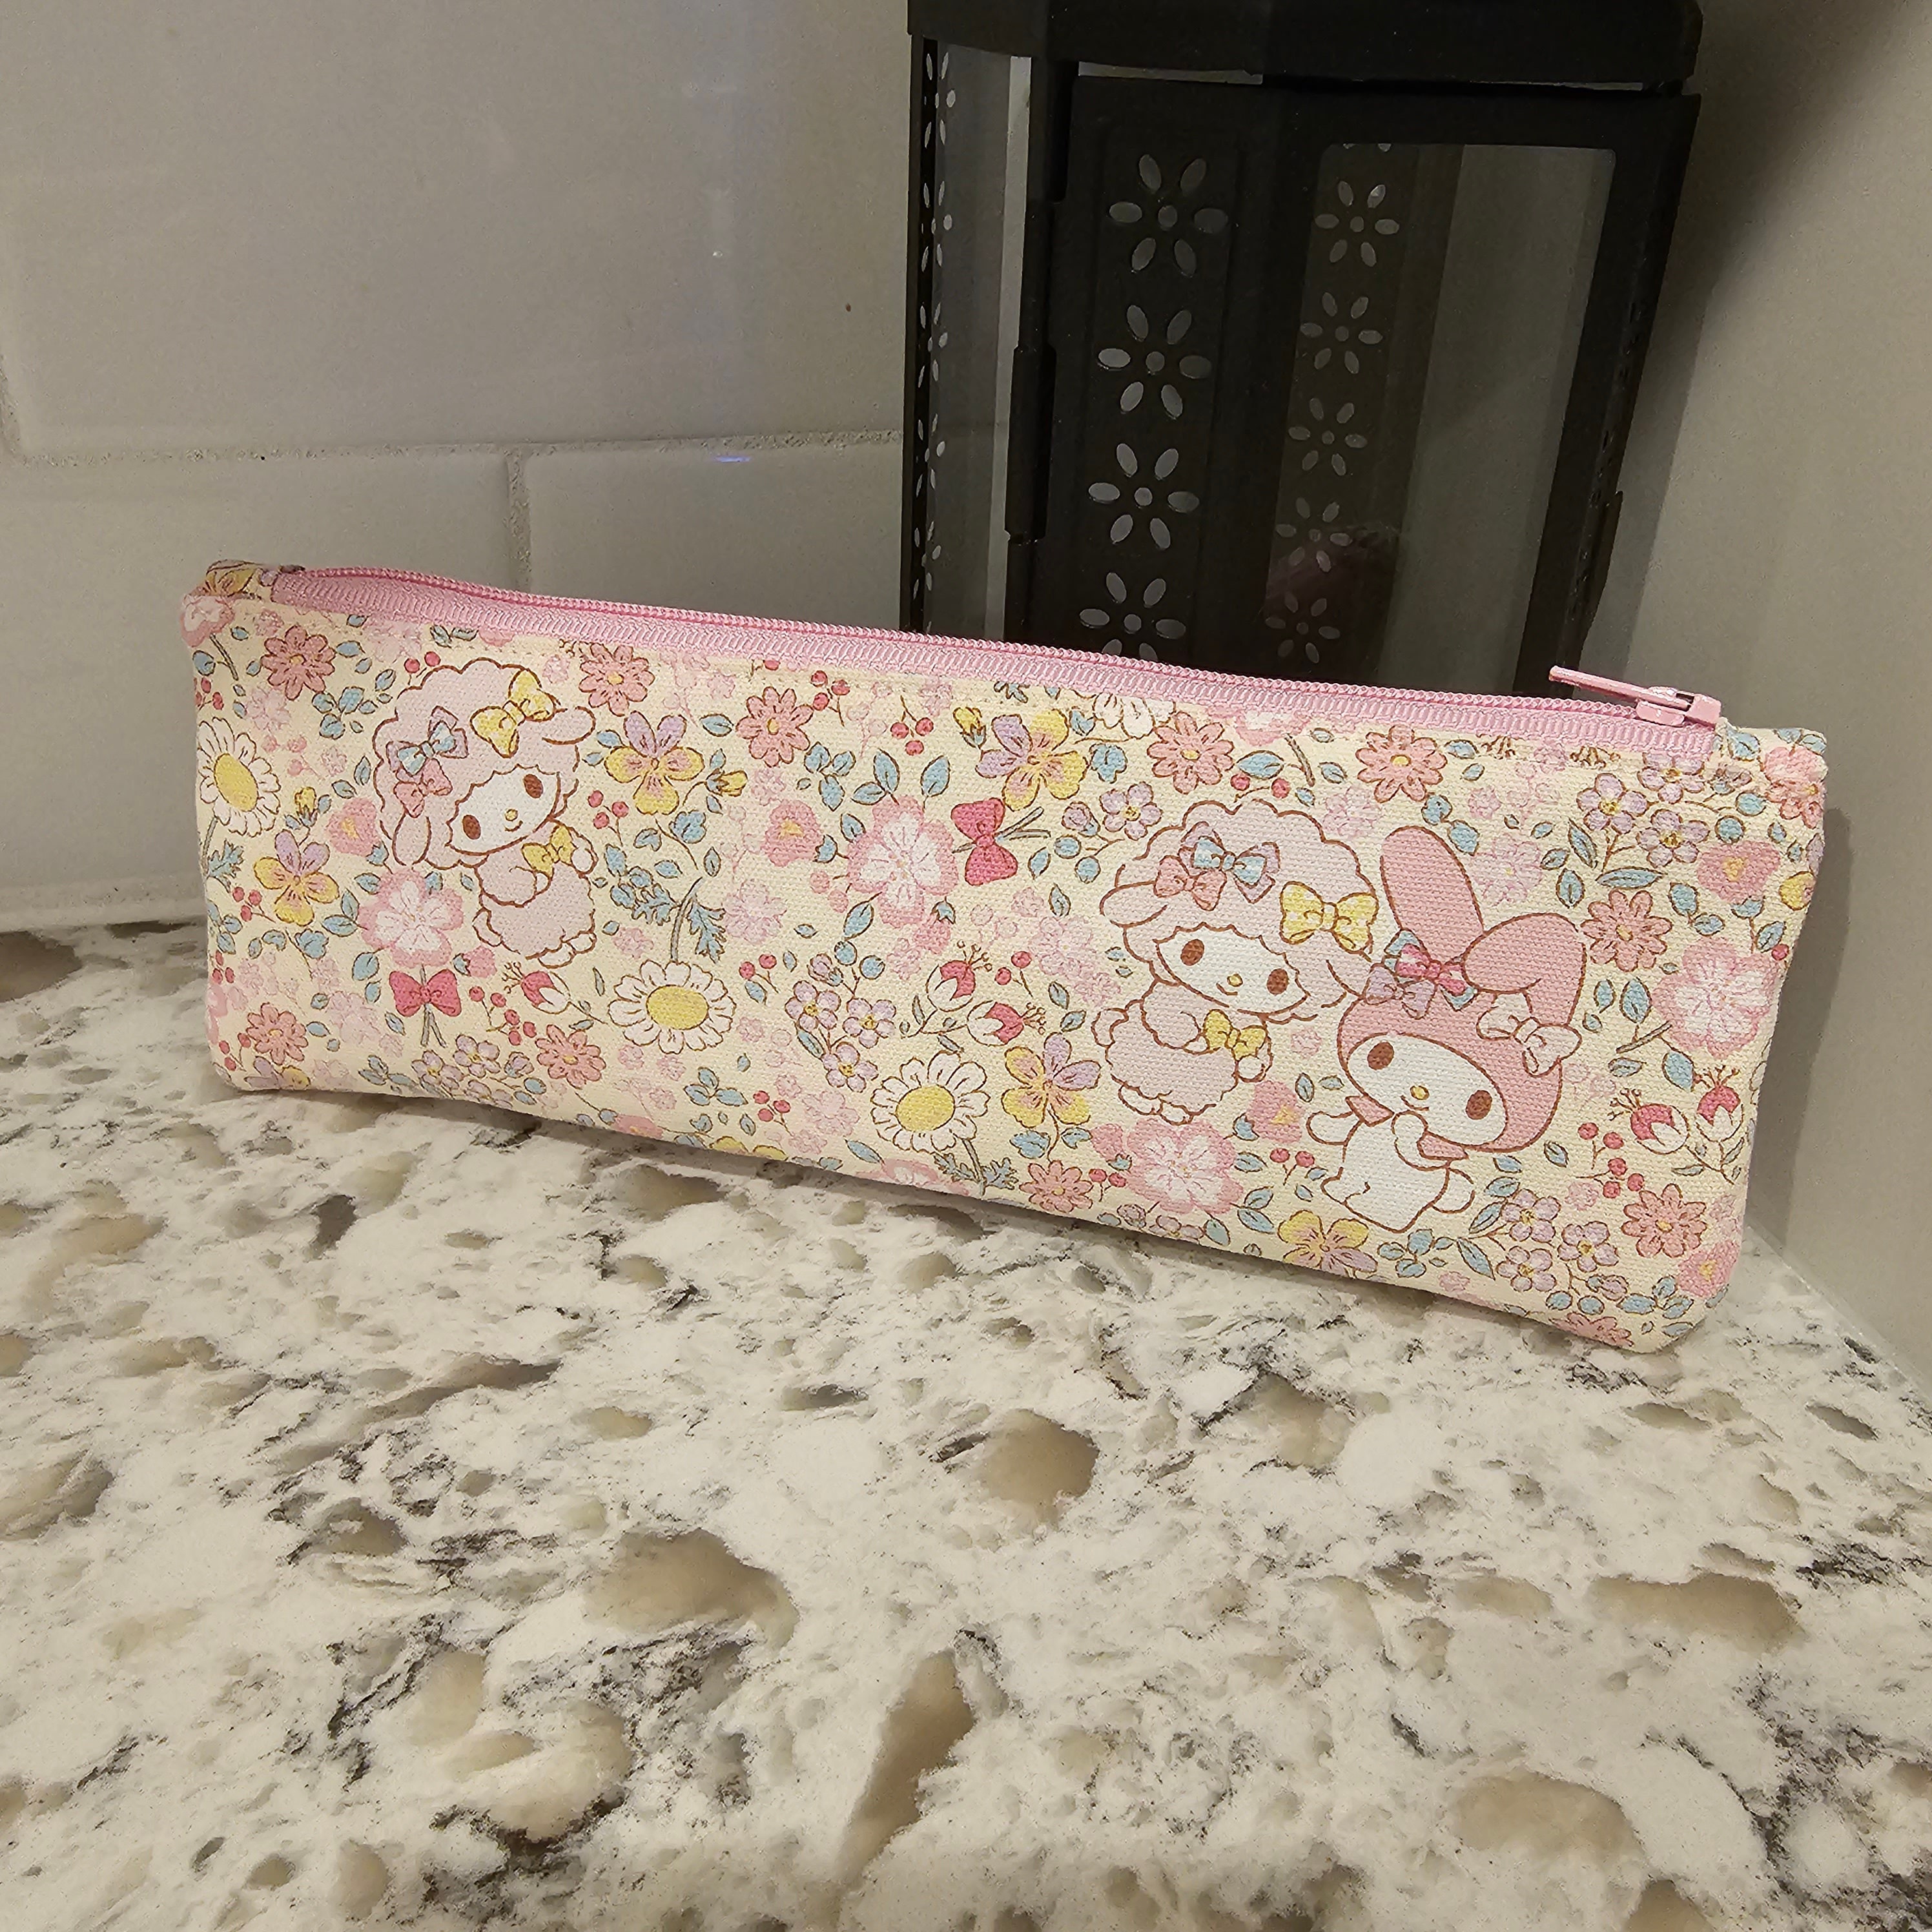 Puffy Soft Pencil Case, Make up Bag Pouch, Zip Pencil Pouch, Kawaii Pencil  Case, Back to School, Travel Bag, Travel Size, Cosmetic Bag 